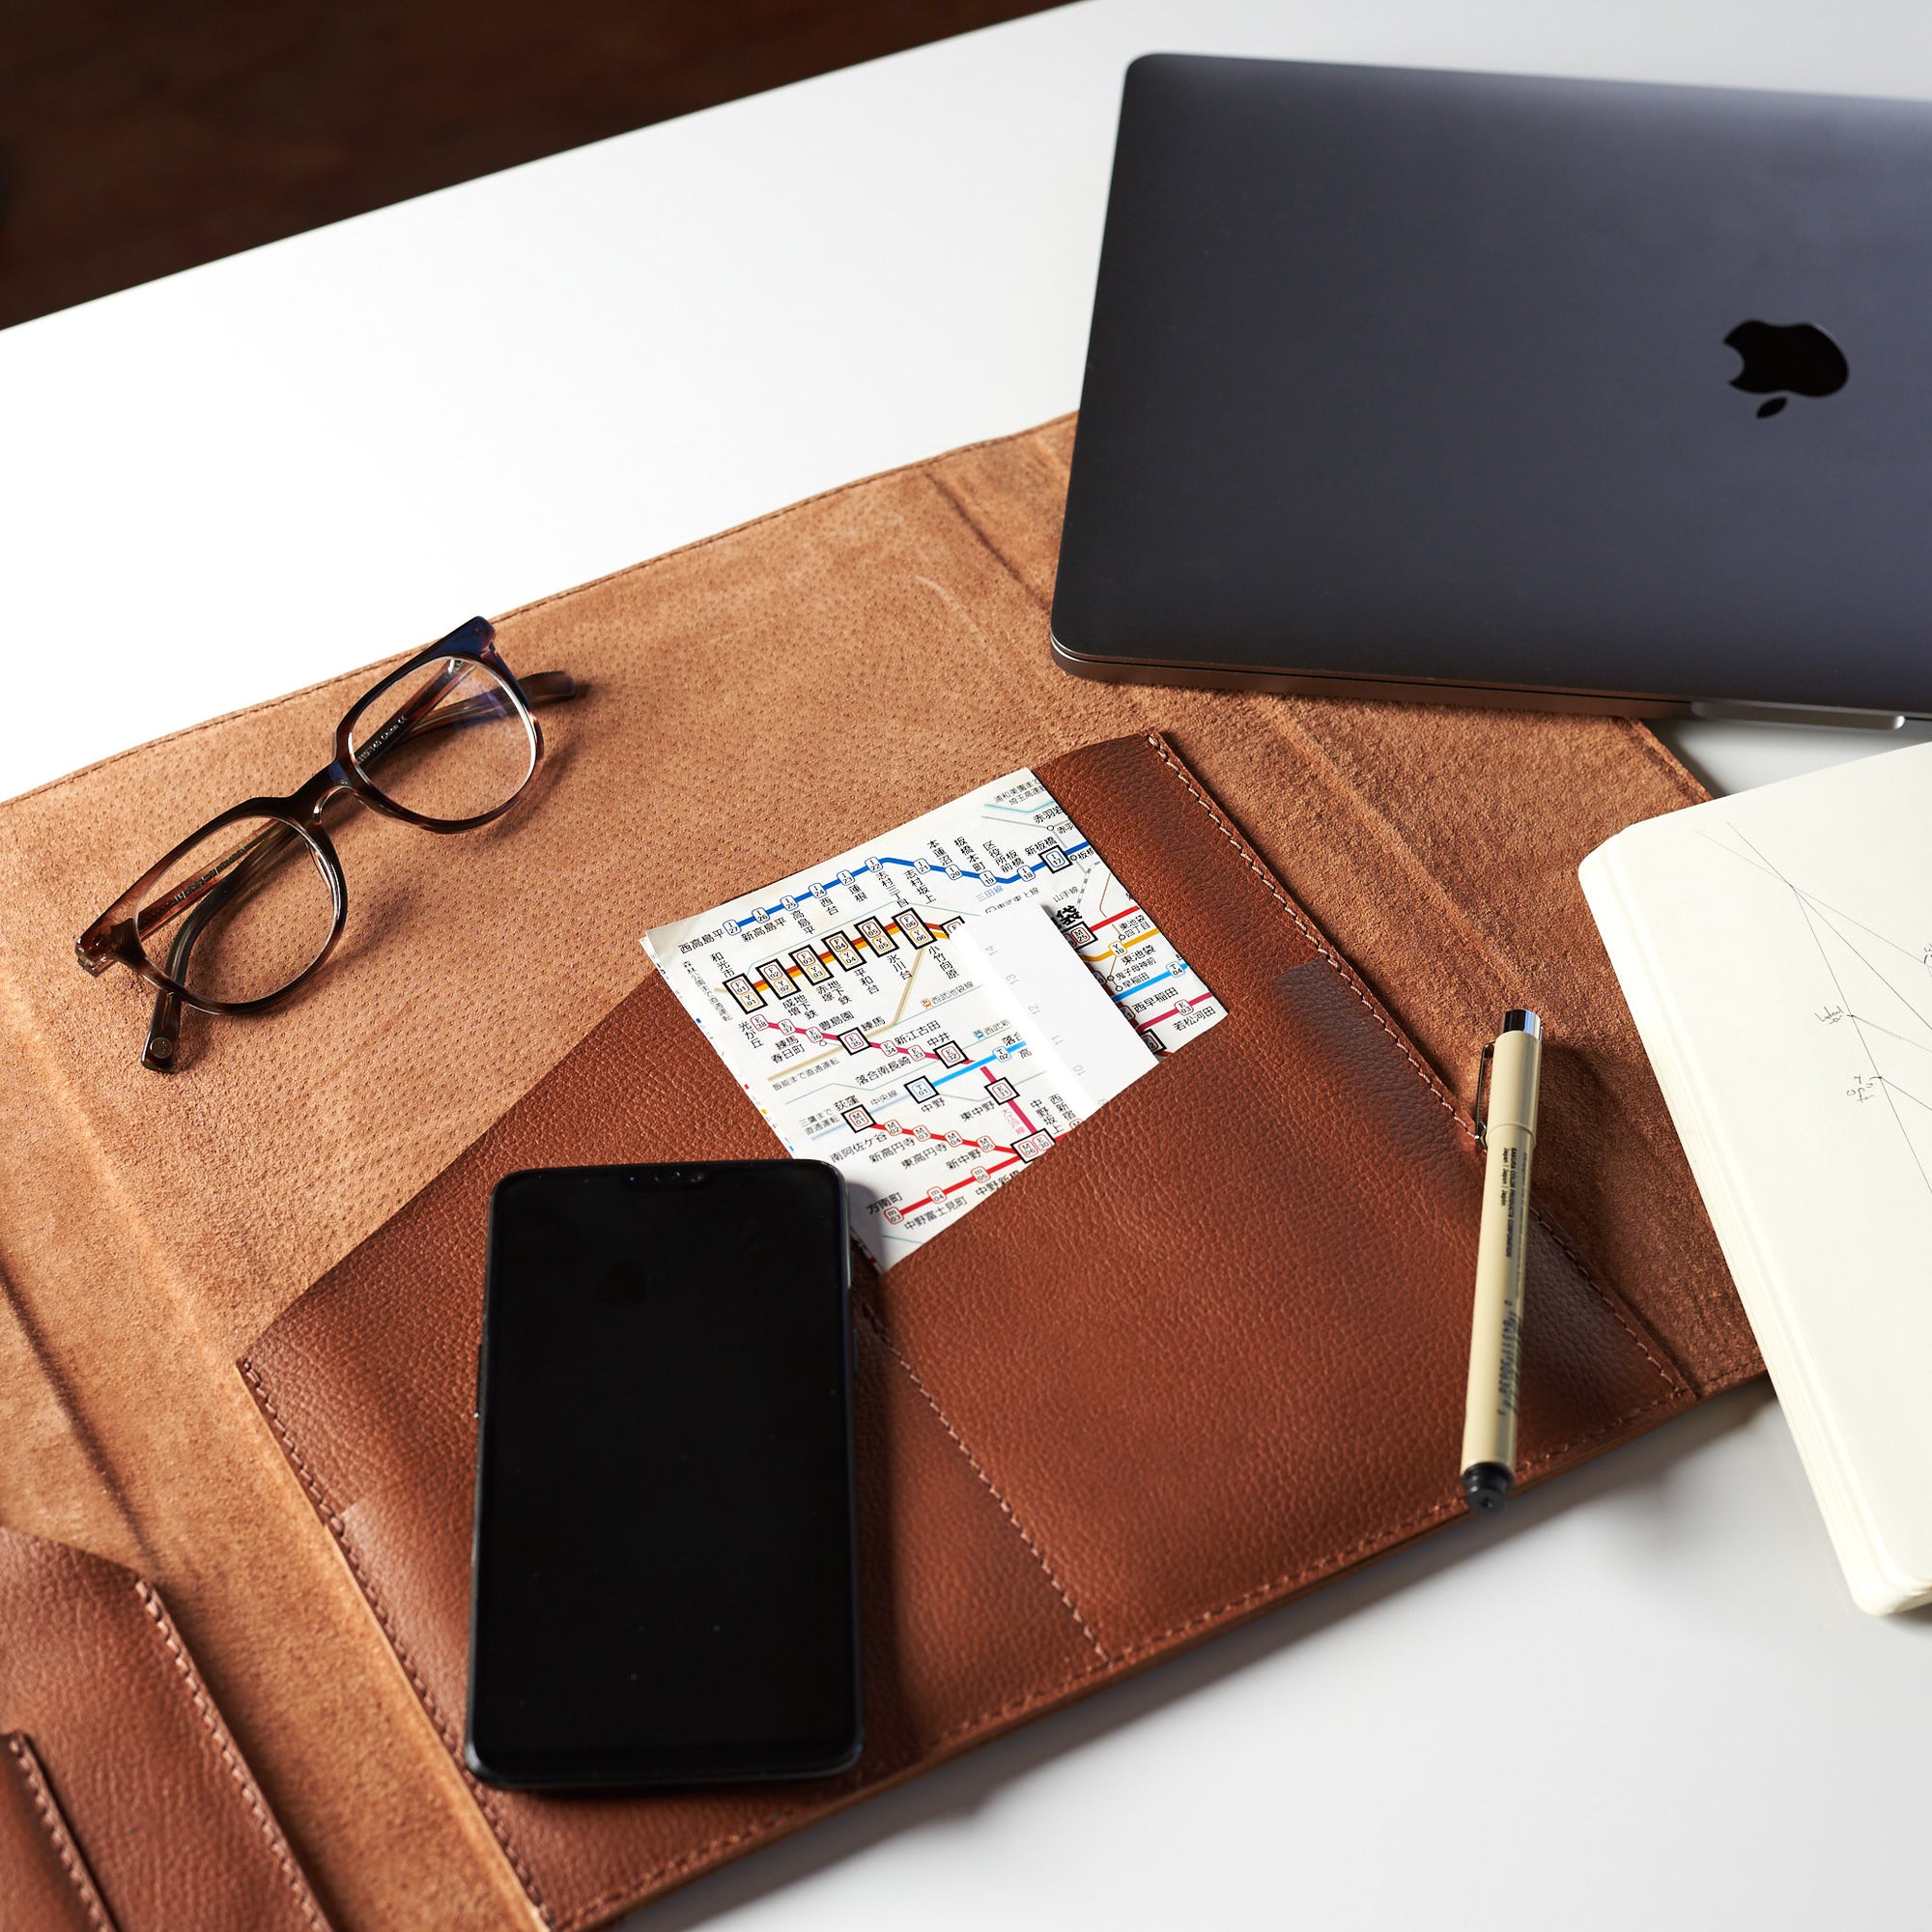 Style inside view. Tan Laptop Tablet Portfolio. Business Document Organizer for Men by Capra Leather